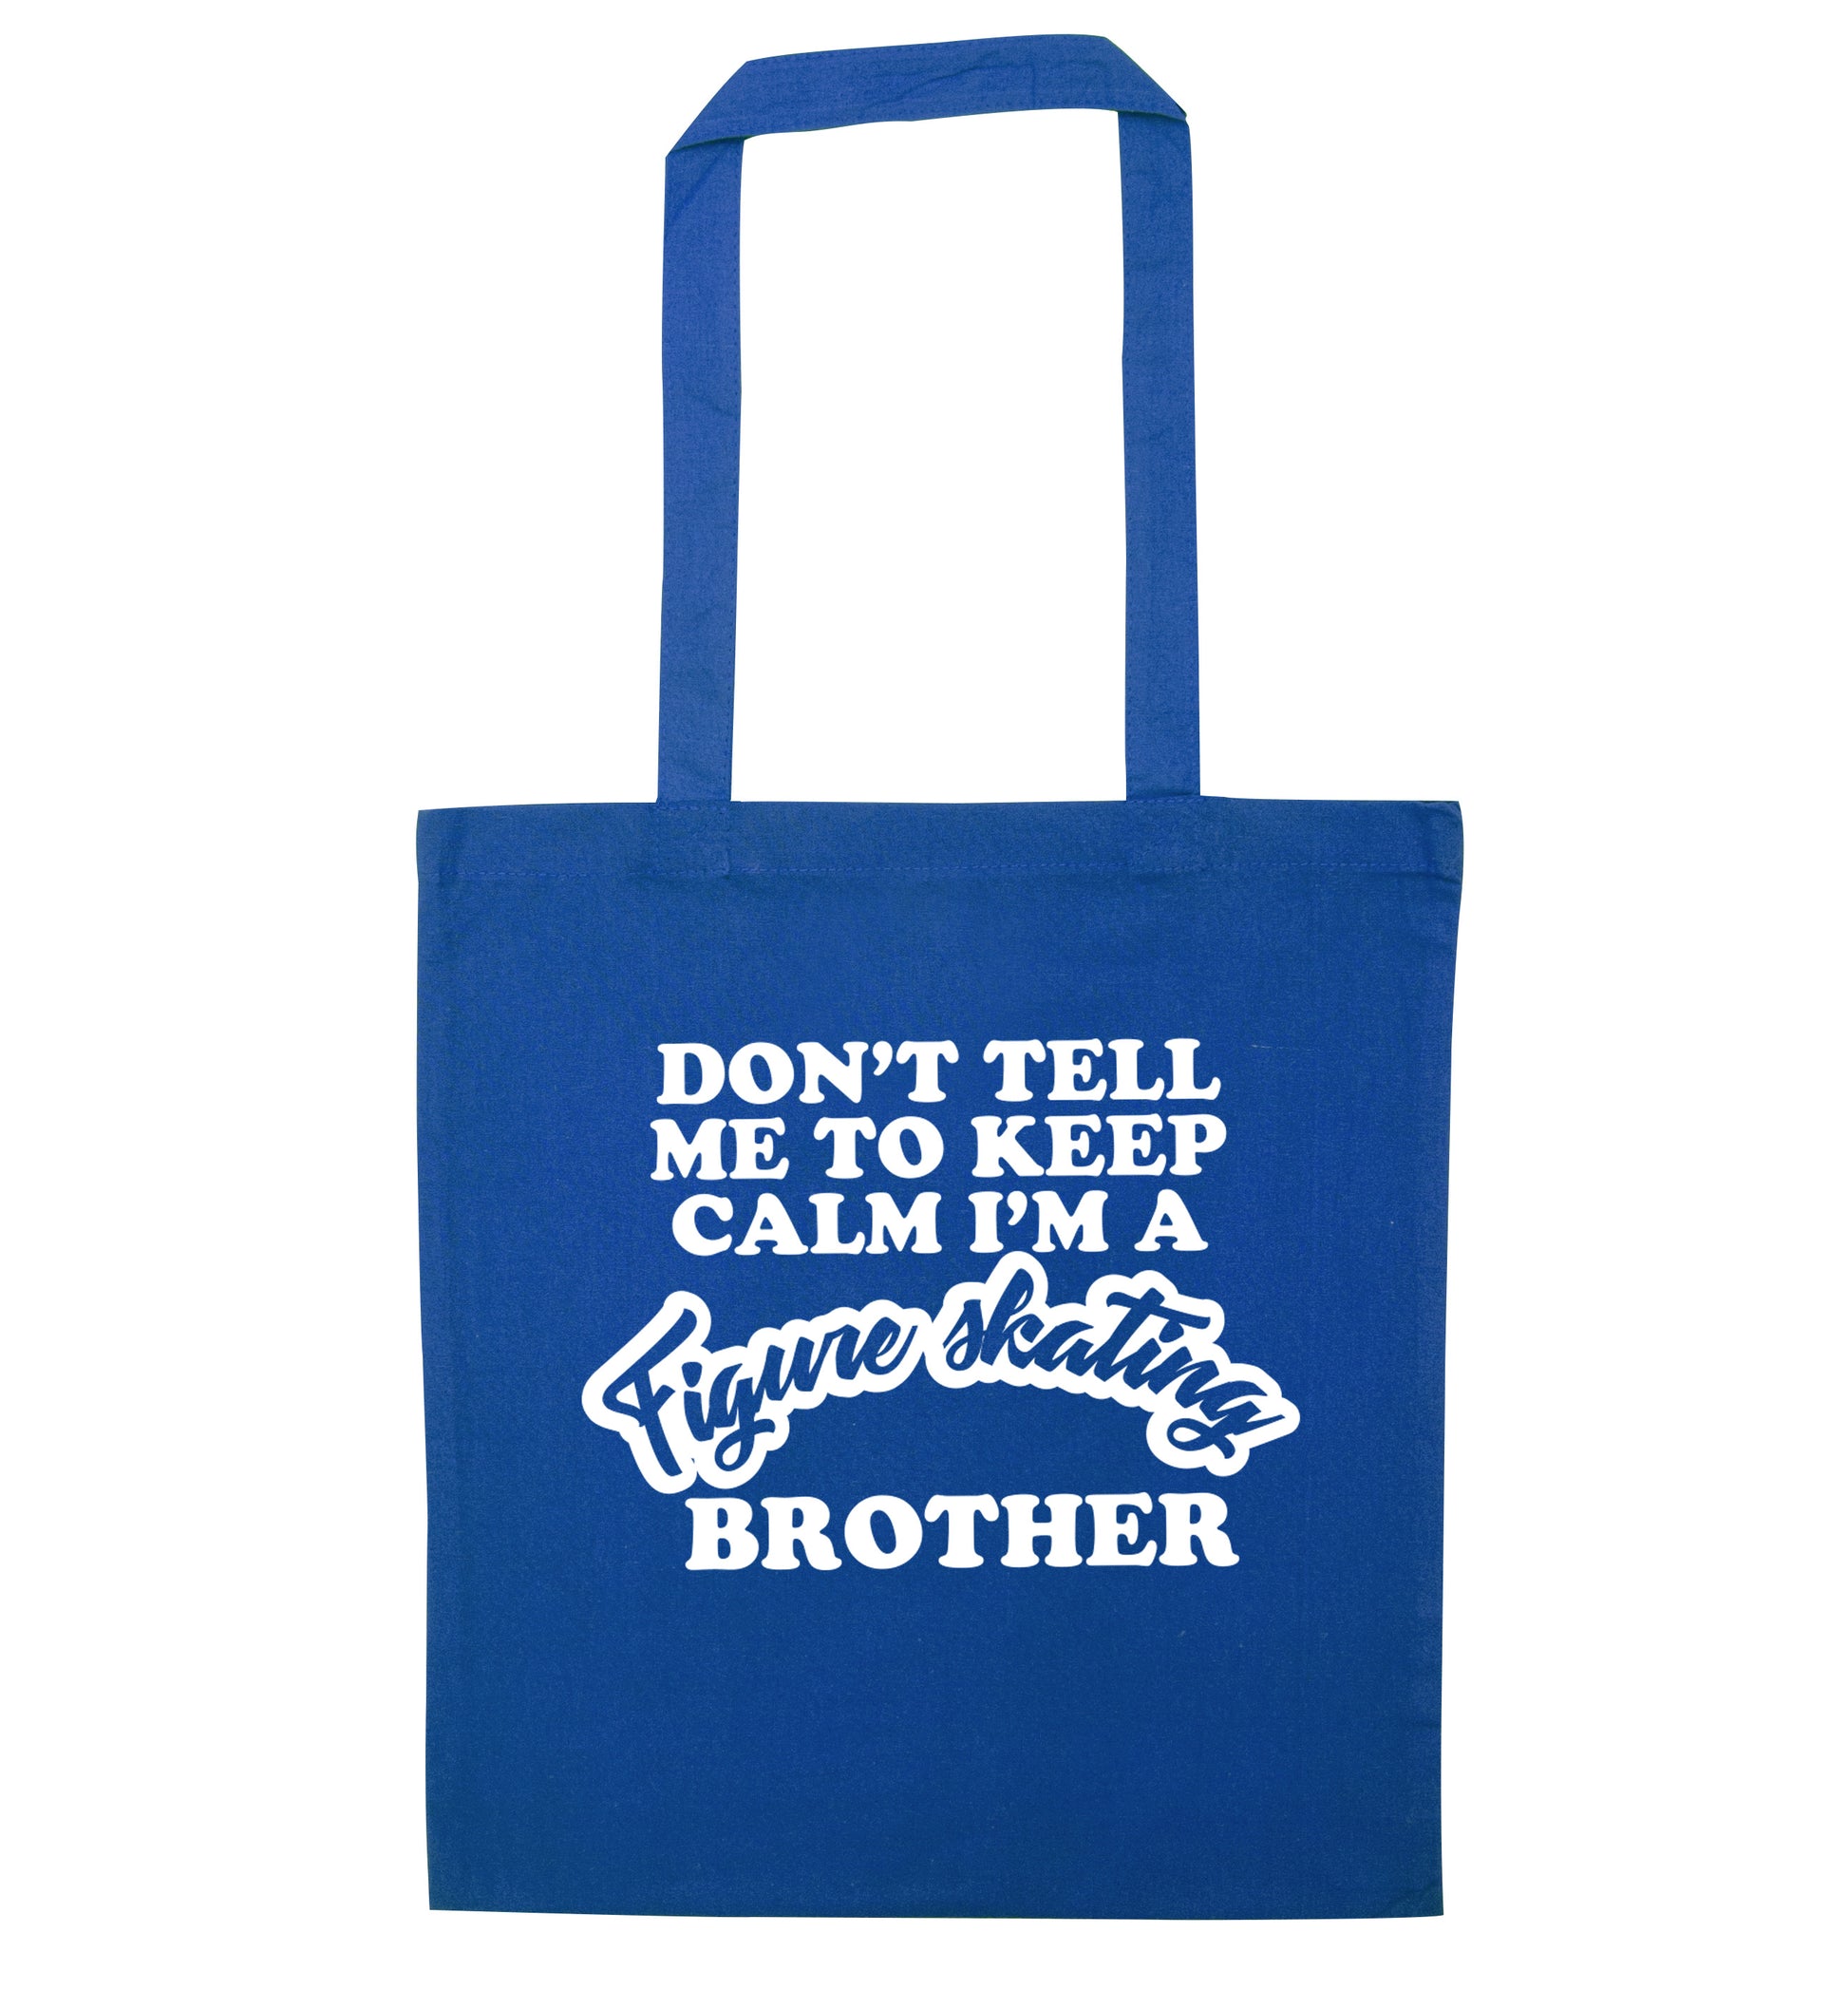 Don't tell me to keep calm I'm a figure skating brother blue tote bag